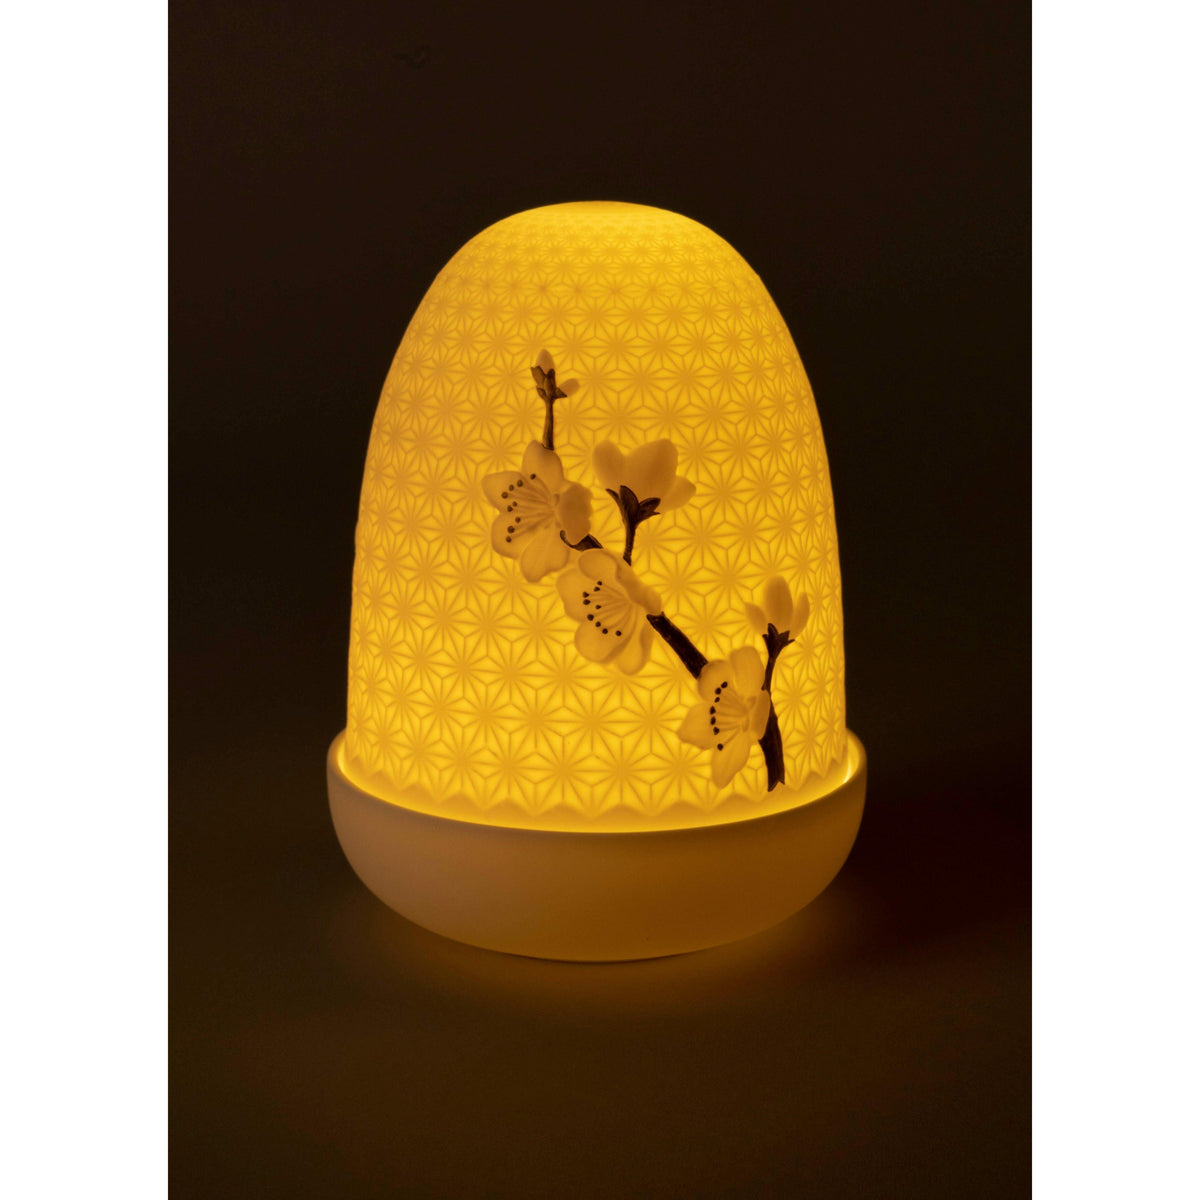 Lladro - Cherry Blossoms Dome Table Lamp - 01023989 | Montreal Lighting & Hardware